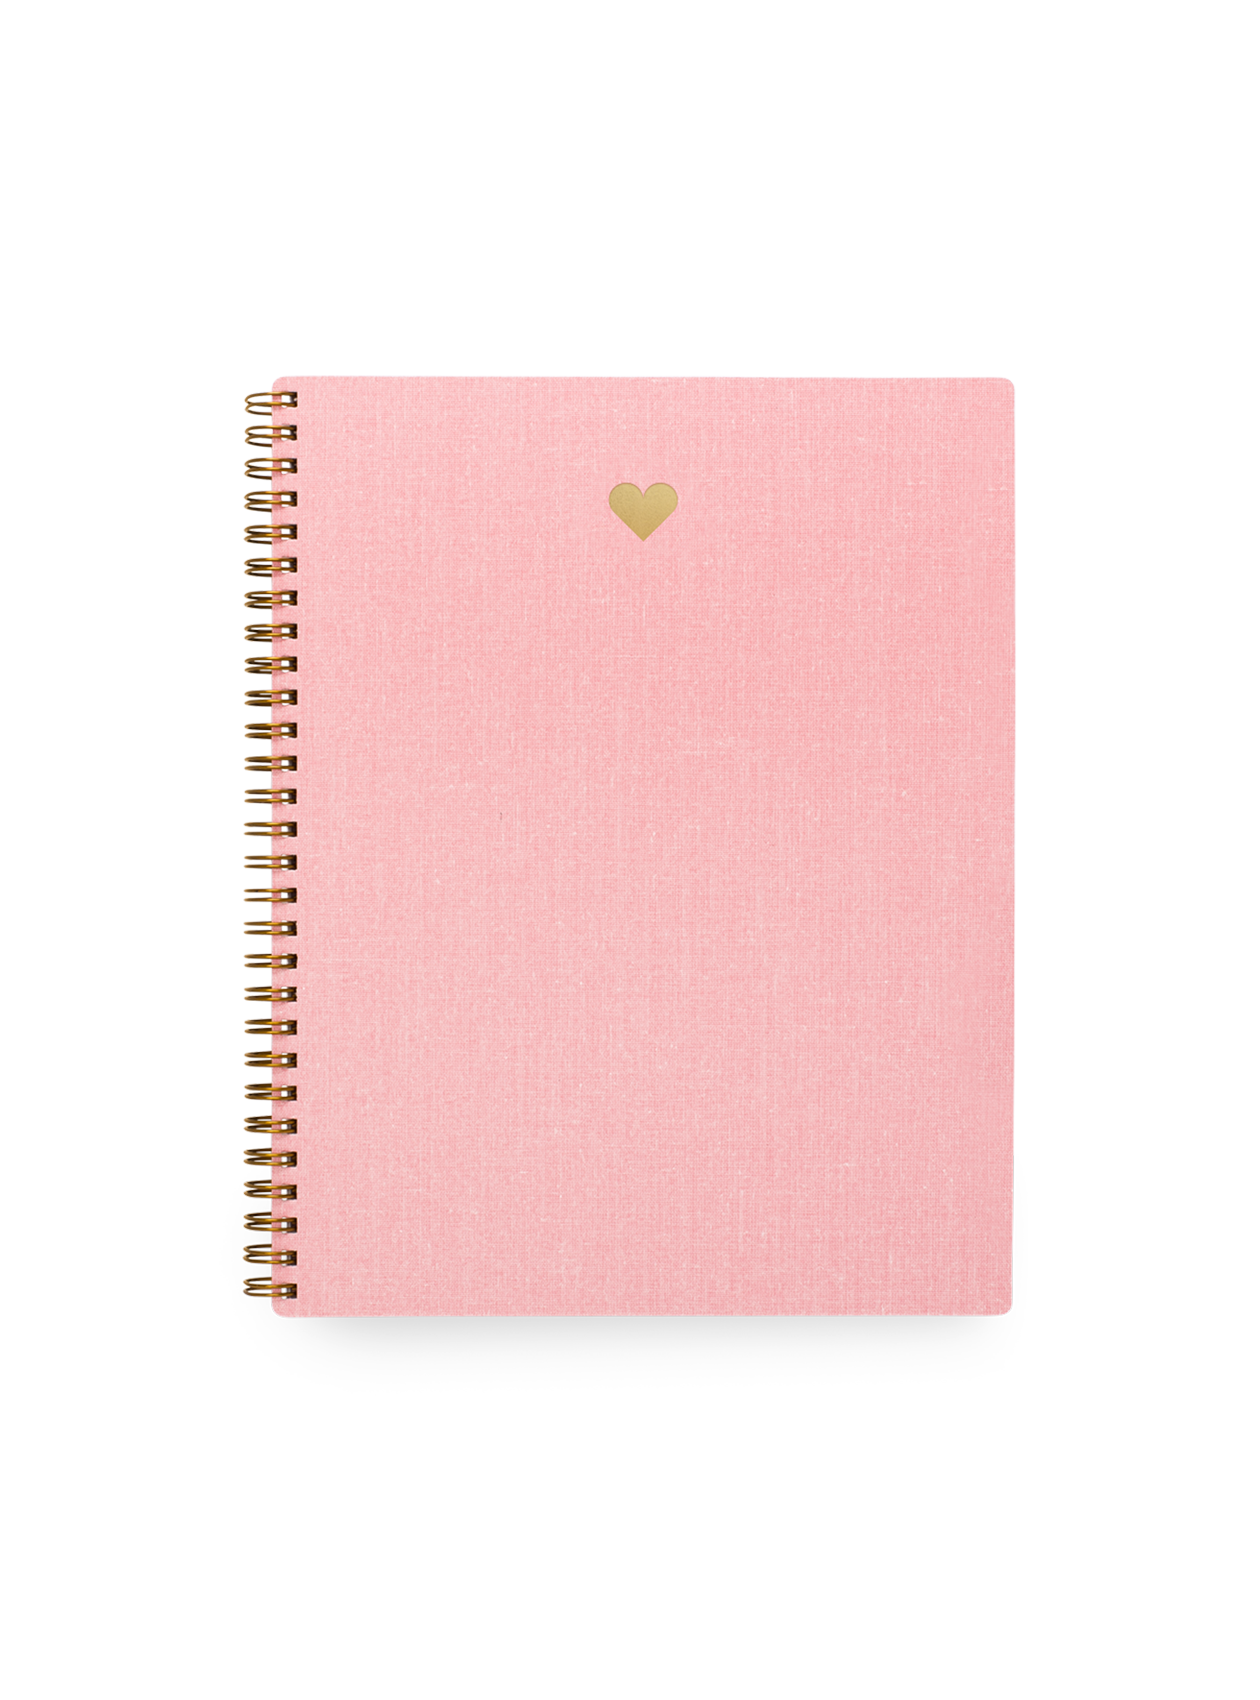 Notebook Review: Compoco Good Luck Cat Journal - The Well-Appointed Desk